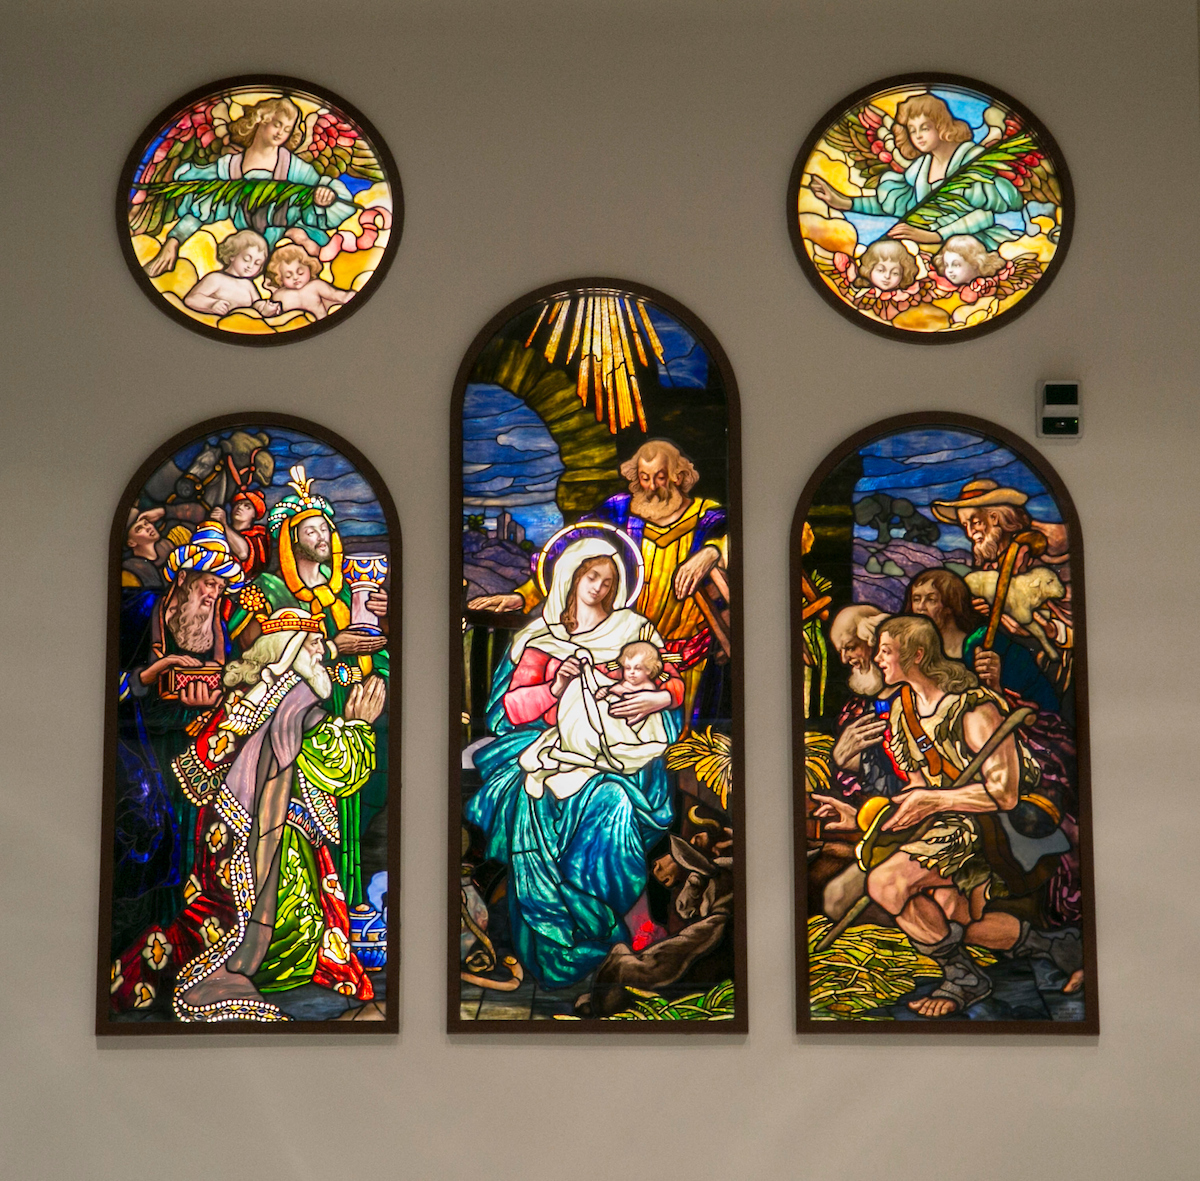  Artists Joseph Flanagan and William Beidenwieg's stained glass panels called 